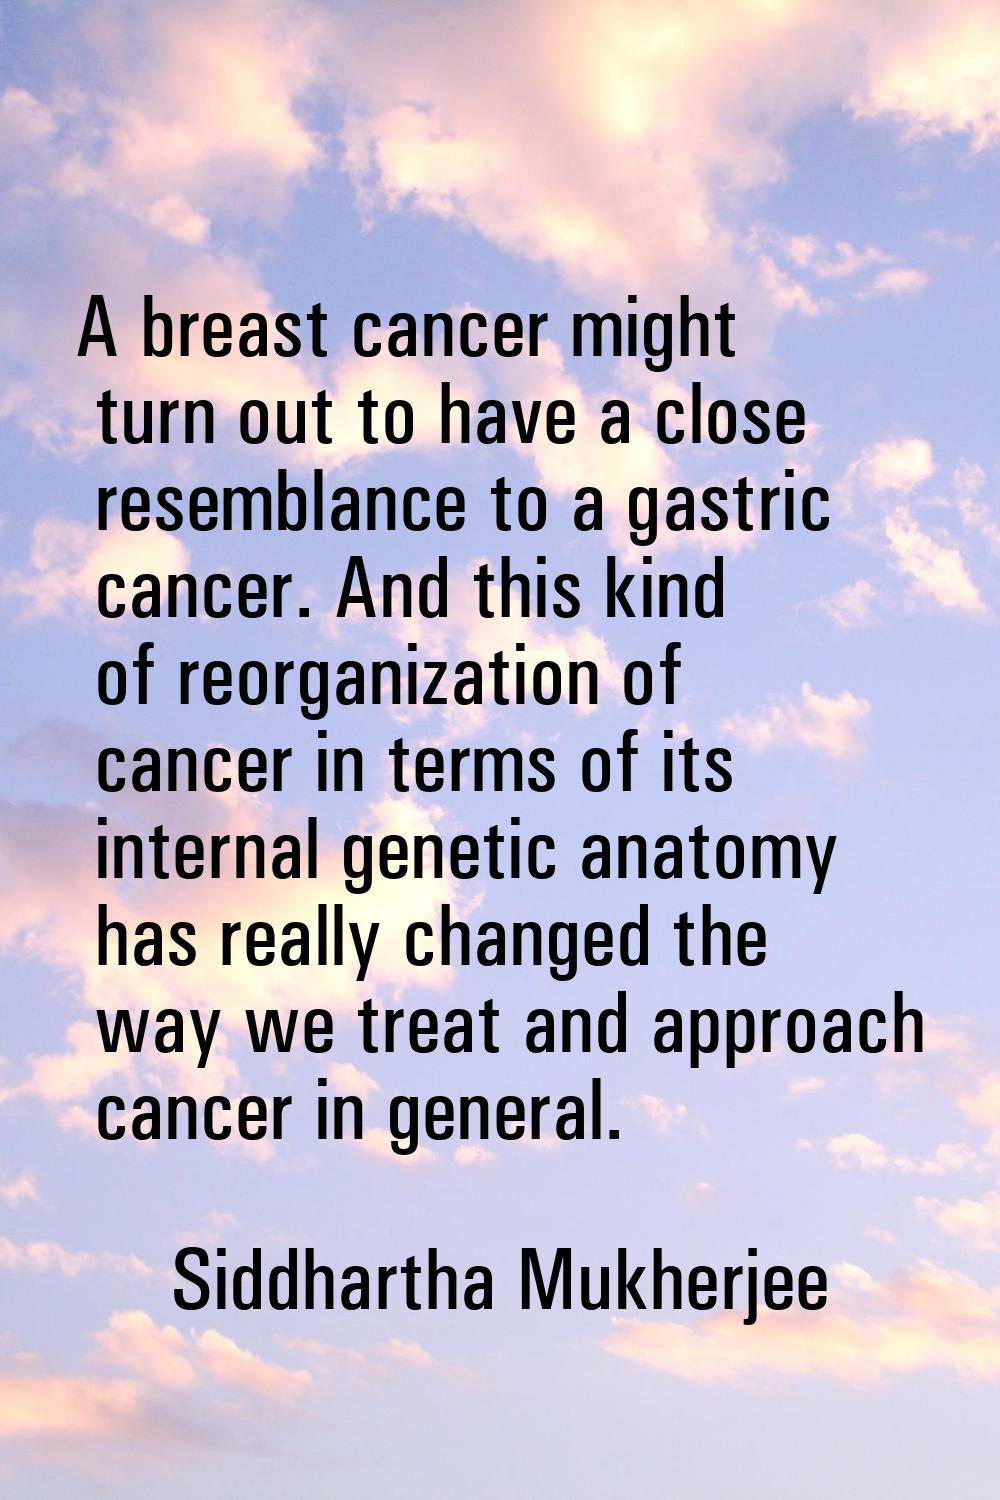 A breast cancer might turn out to have a close resemblance to a gastric cancer. And this kind of re